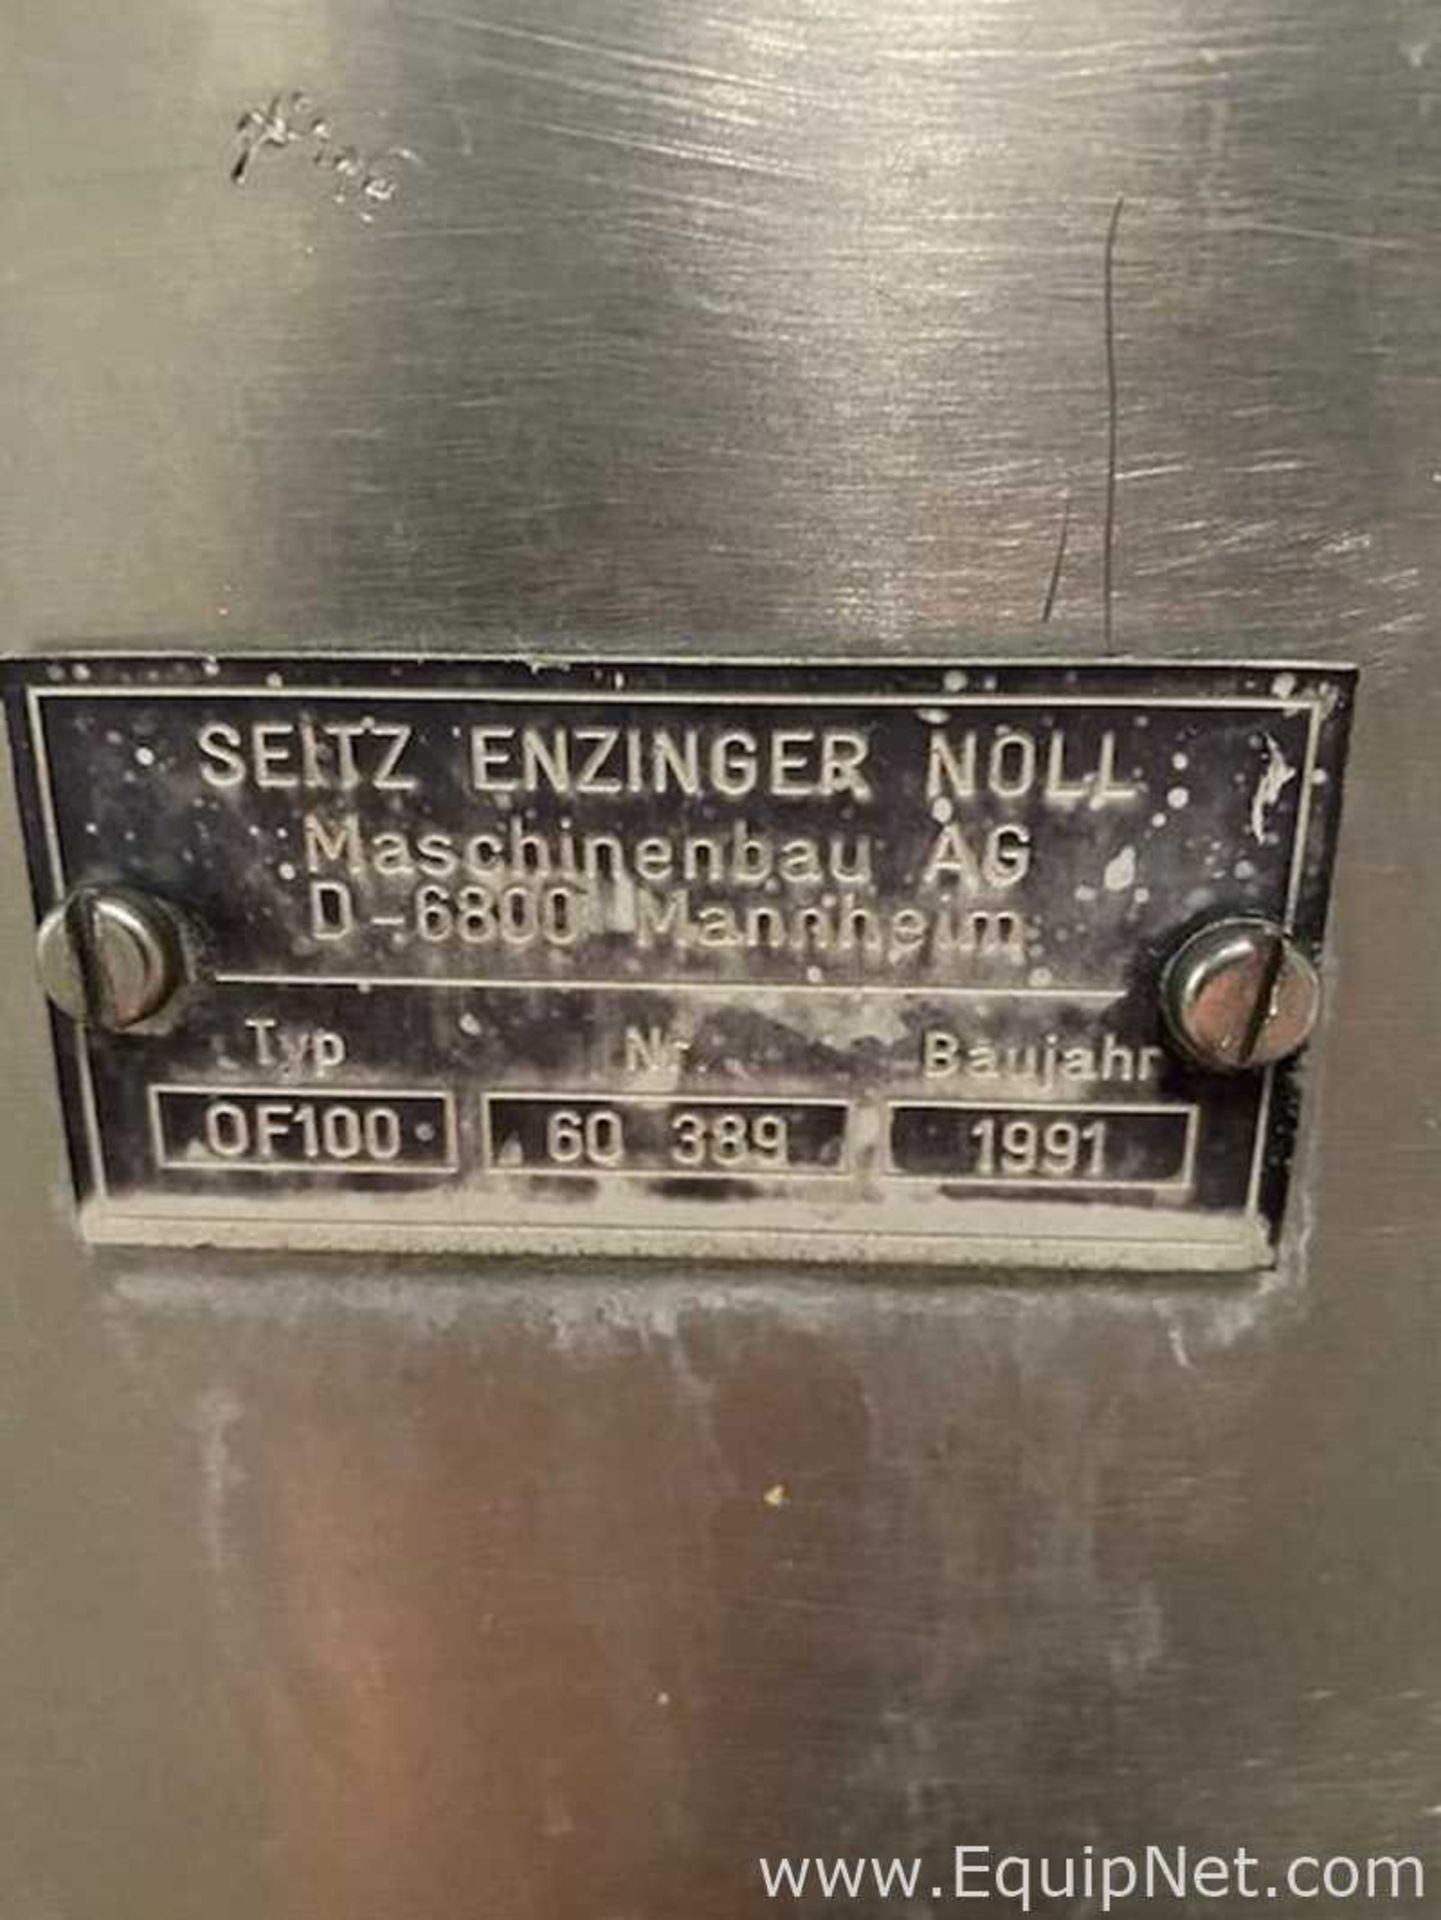 Seitz Enzinger Noll OF100 Filter Press From Micro Brewery Service - Image 5 of 6